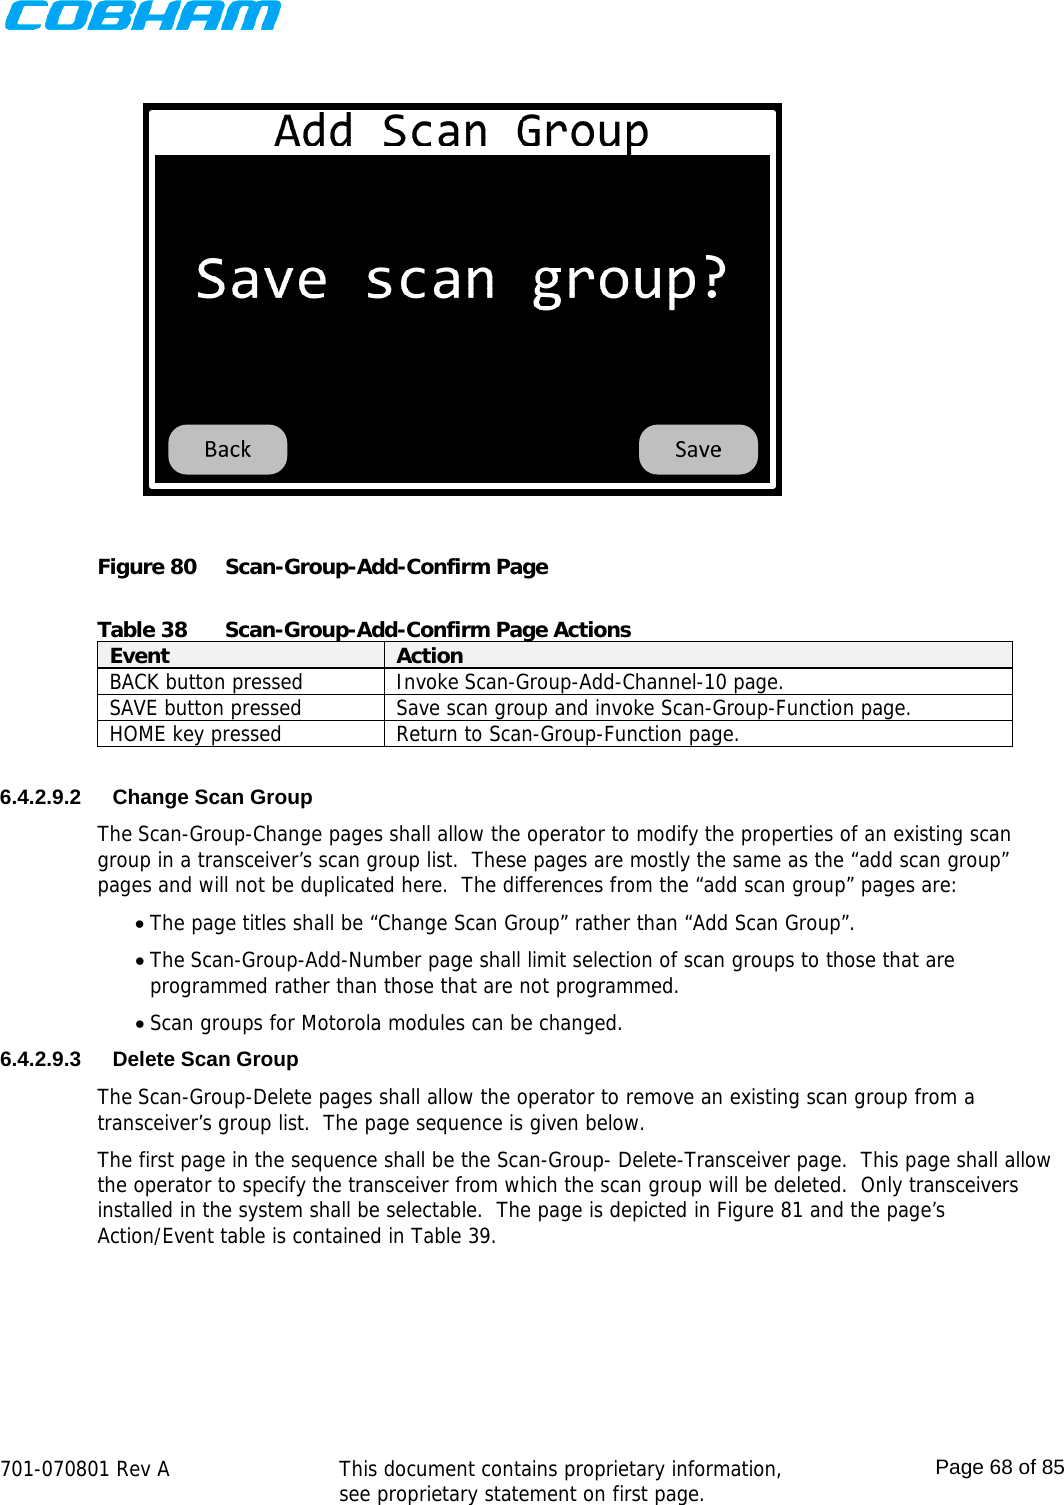    701-070801 Rev A   This document contains proprietary information, see proprietary statement on first page.  Page 68 of 85   Figure 80  Scan-Group-Add-Confirm Page  Table 38  Scan-Group-Add-Confirm Page Actions Event  Action BACK button pressed  Invoke Scan-Group-Add-Channel-10 page. SAVE button pressed  Save scan group and invoke Scan-Group-Function page. HOME key pressed  Return to Scan-Group-Function page.  6.4.2.9.2  Change Scan Group The Scan-Group-Change pages shall allow the operator to modify the properties of an existing scan group in a transceiver’s scan group list.  These pages are mostly the same as the “add scan group” pages and will not be duplicated here.  The differences from the “add scan group” pages are:   The page titles shall be “Change Scan Group” rather than “Add Scan Group”.  The Scan-Group-Add-Number page shall limit selection of scan groups to those that are programmed rather than those that are not programmed.  Scan groups for Motorola modules can be changed. 6.4.2.9.3 Delete Scan Group The Scan-Group-Delete pages shall allow the operator to remove an existing scan group from a transceiver’s group list.  The page sequence is given below. The first page in the sequence shall be the Scan-Group- Delete-Transceiver page.  This page shall allow the operator to specify the transceiver from which the scan group will be deleted.  Only transceivers installed in the system shall be selectable.  The page is depicted in Figure 81 and the page’s Action/Event table is contained in Table 39. 